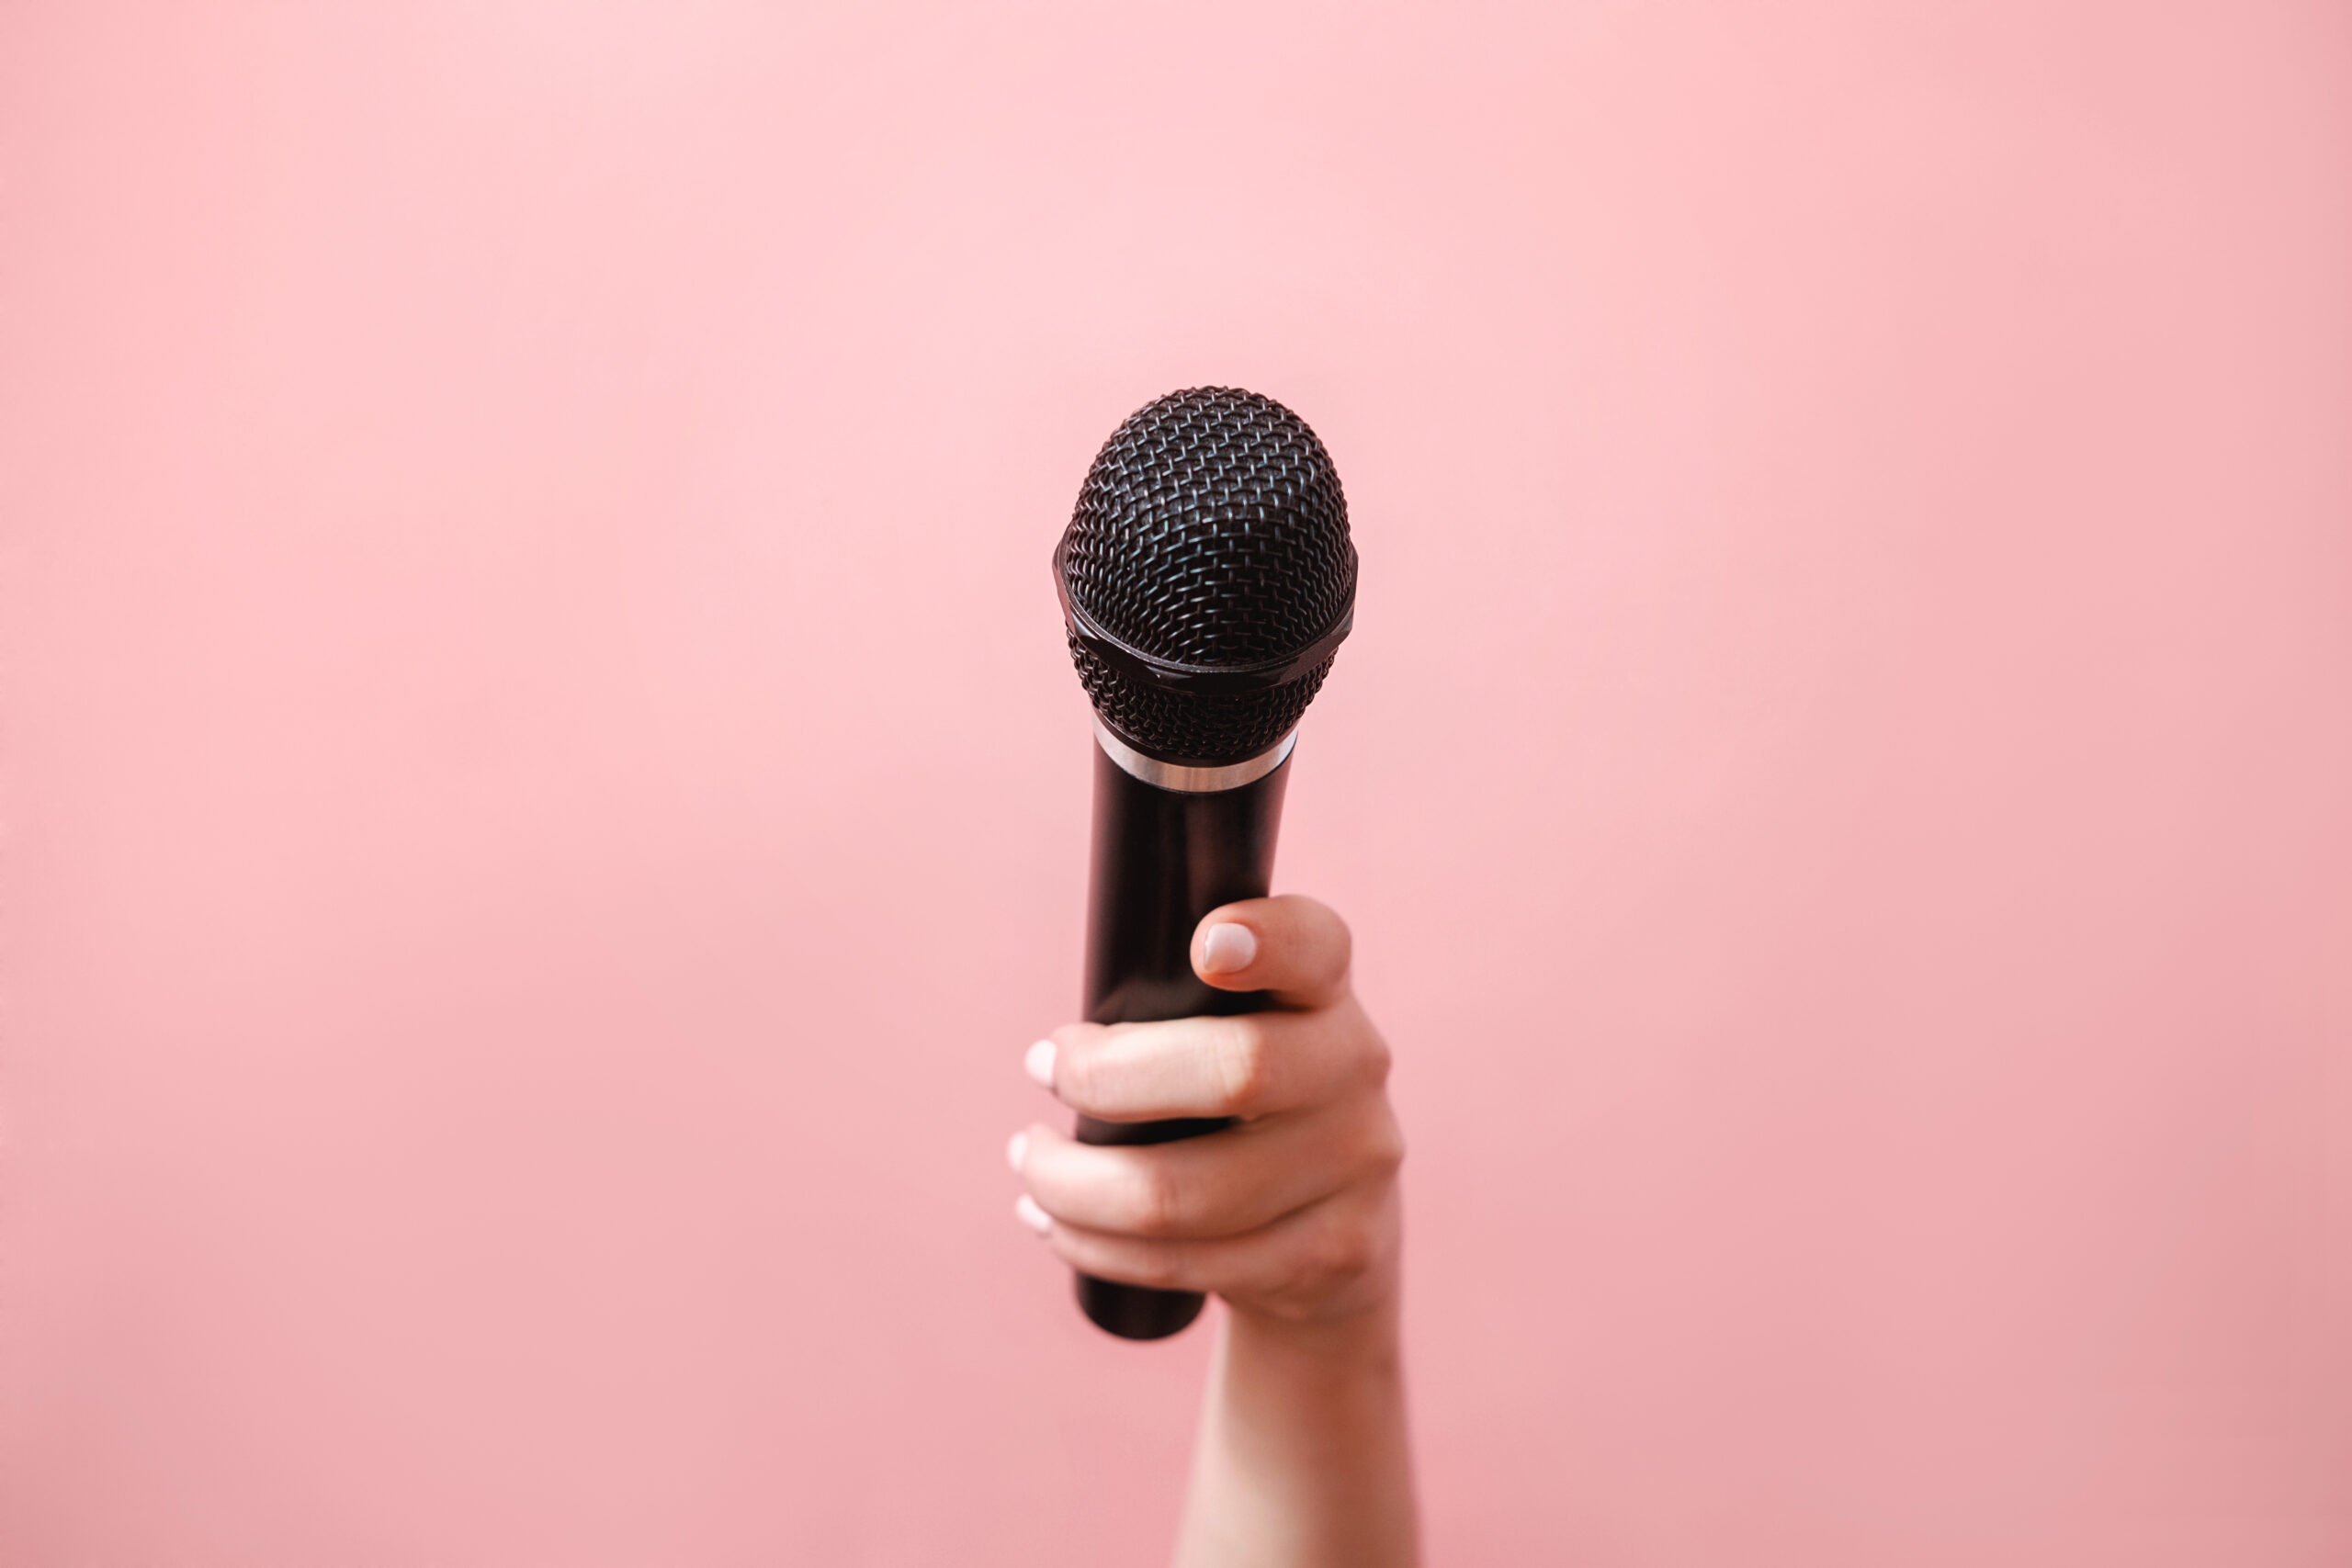 Female hand holding a microphone on a pink background